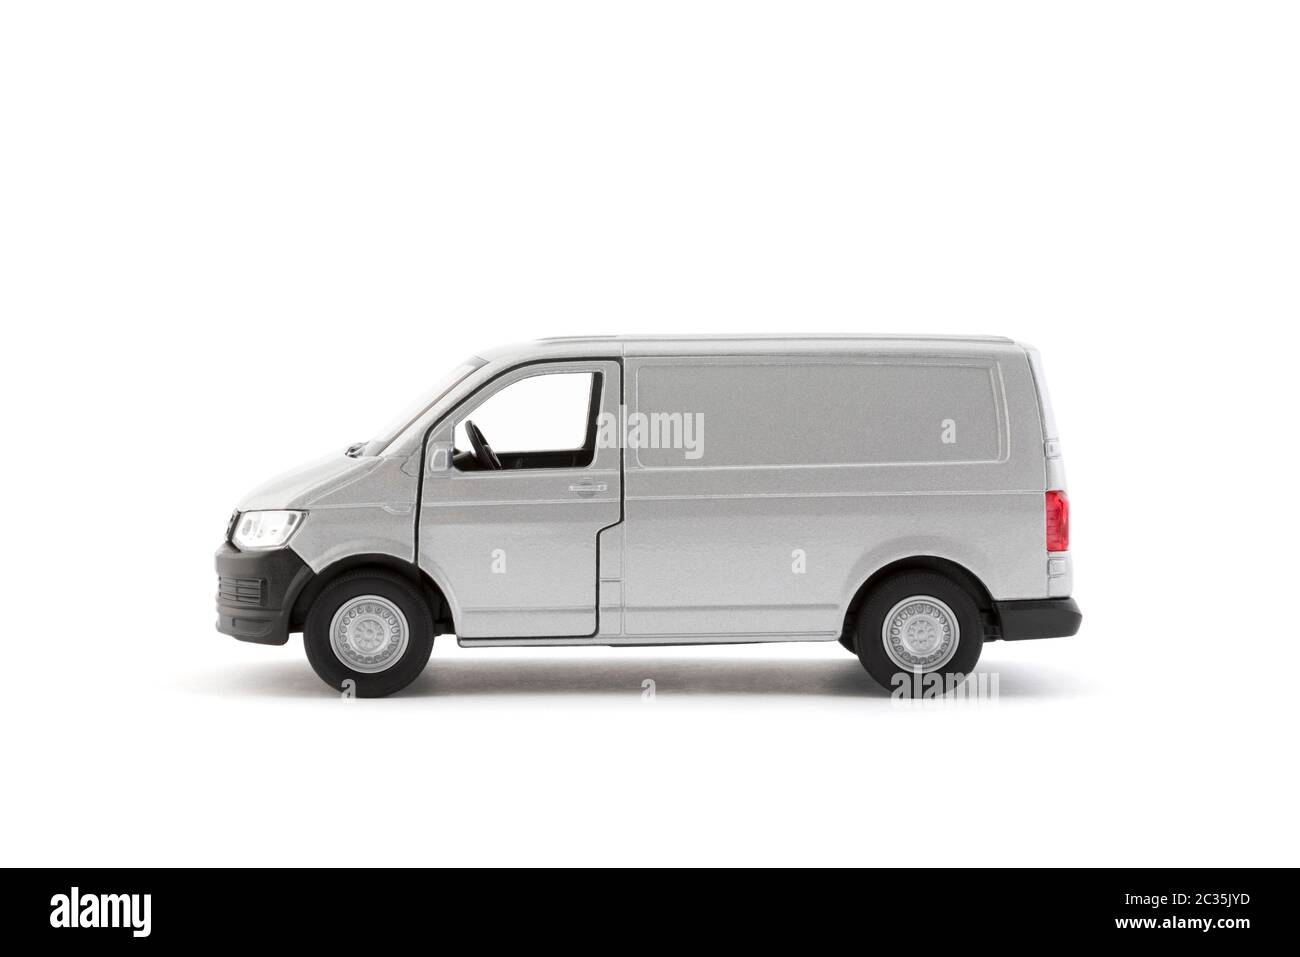 Transport silver van car on white background with clipping path Stock Photo